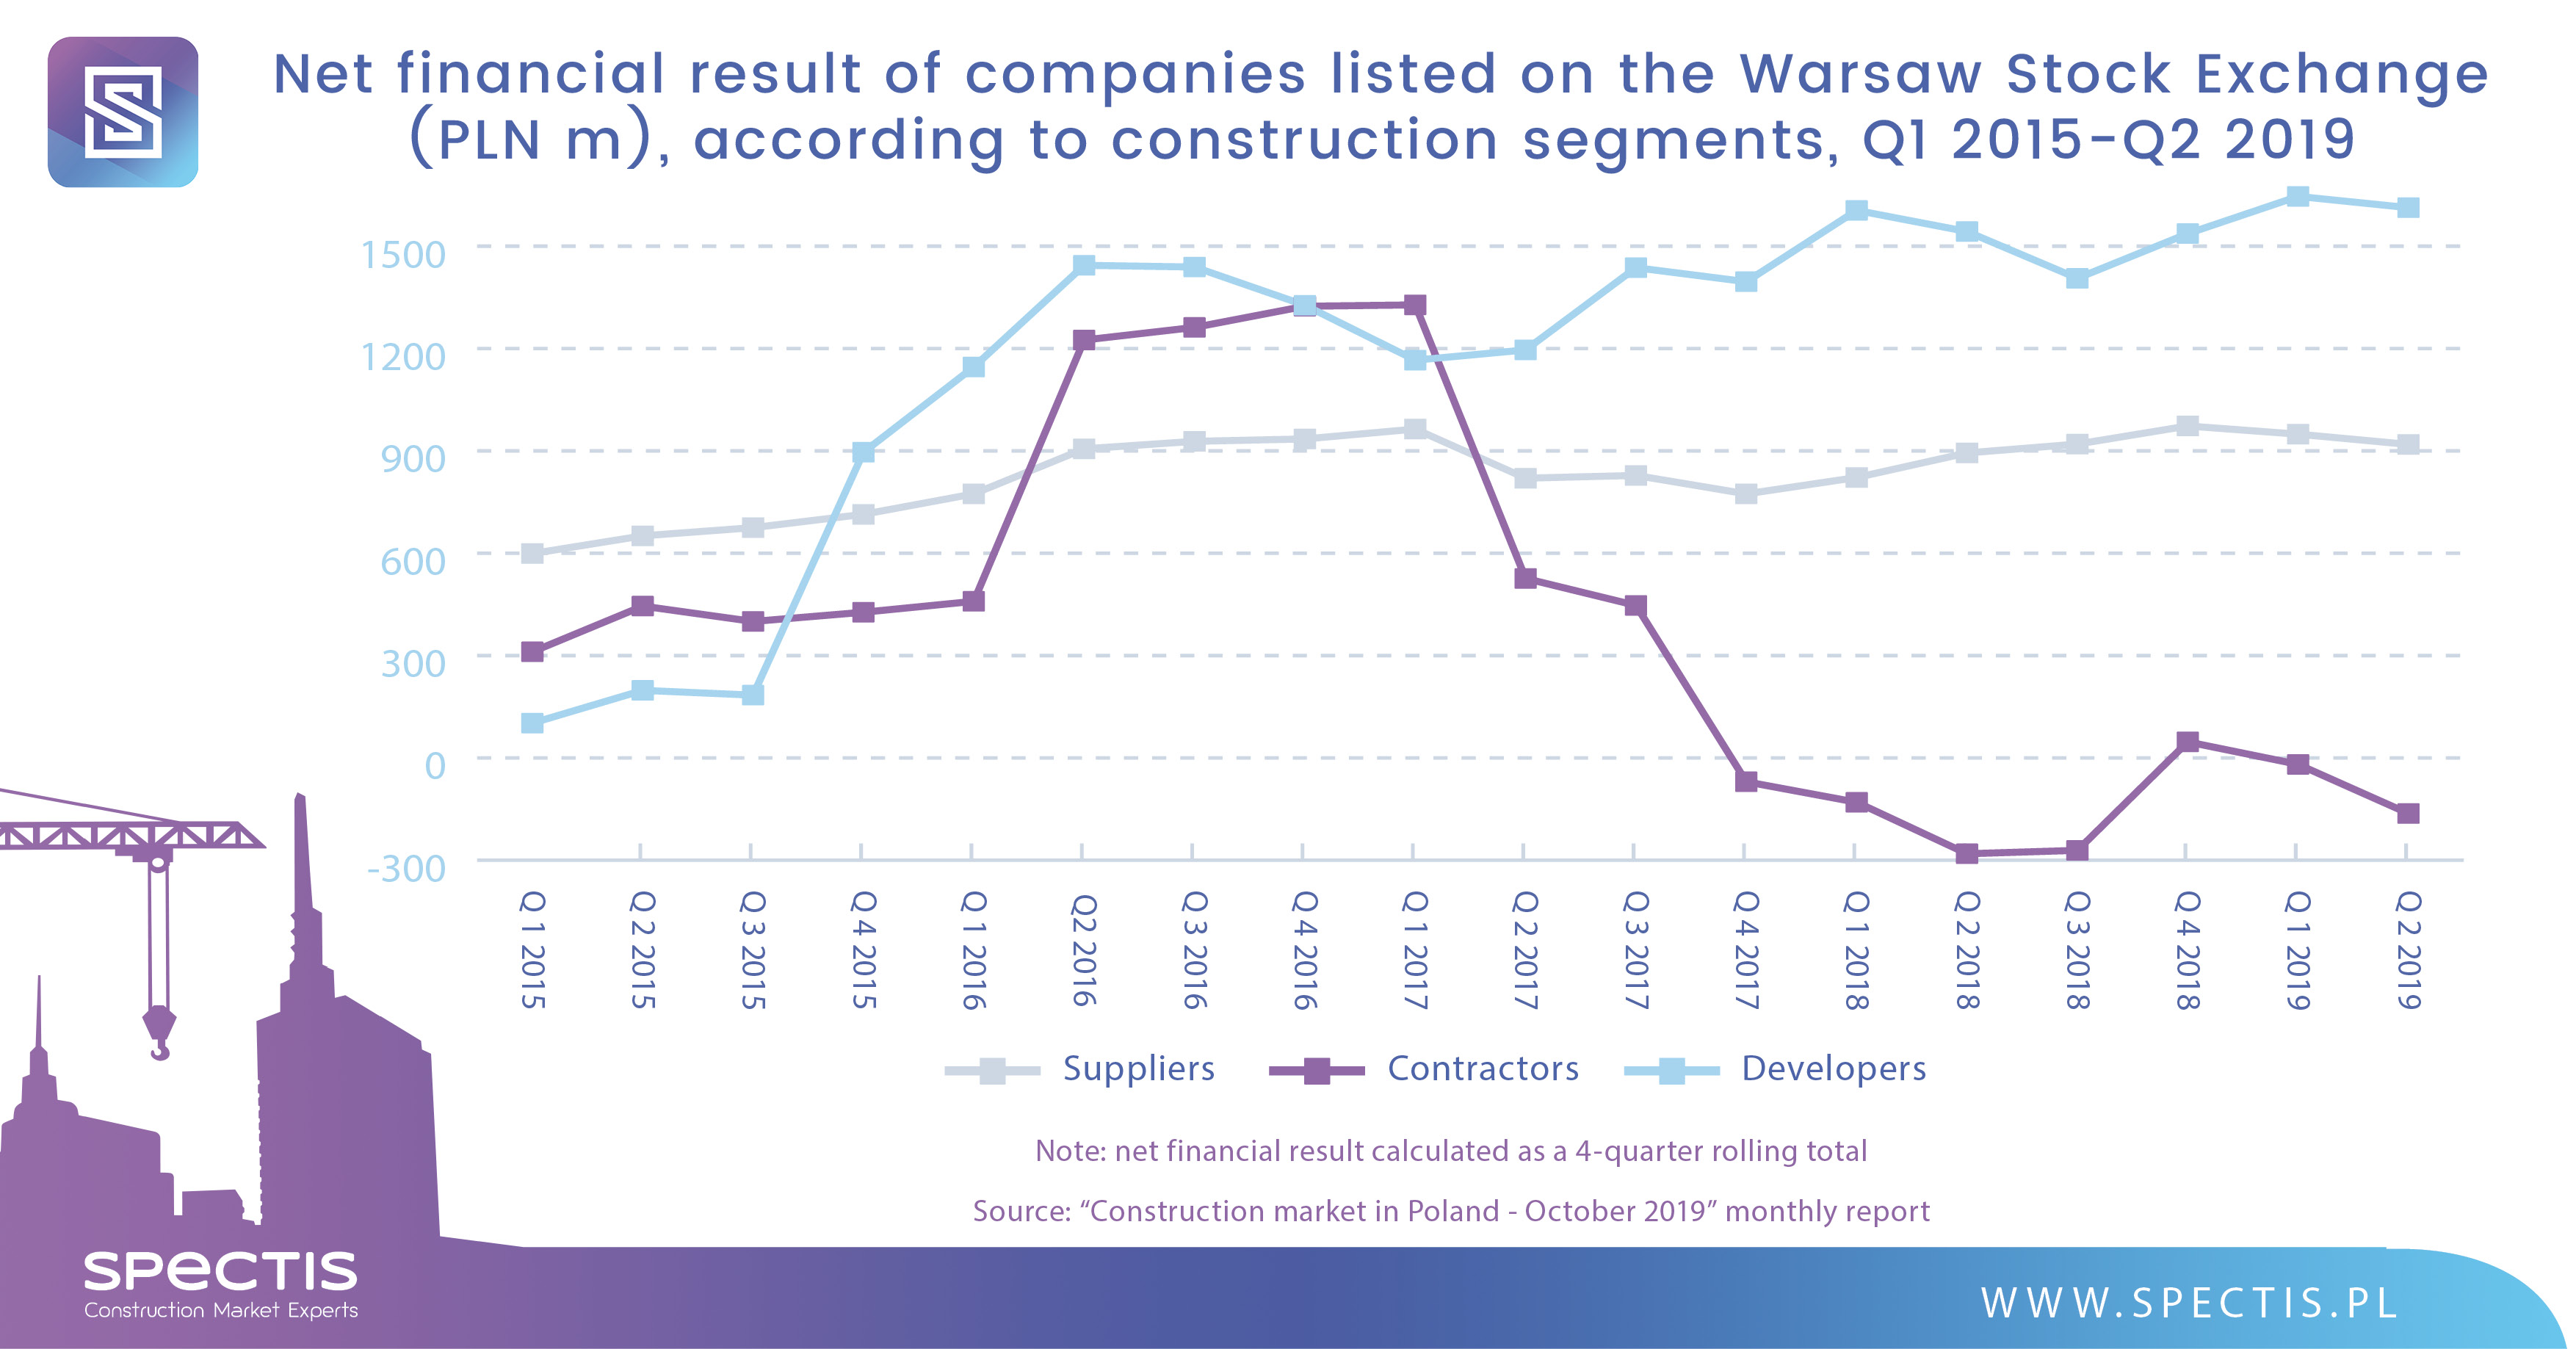 WSE-listed construction companies report negative profitability in Q2 2019